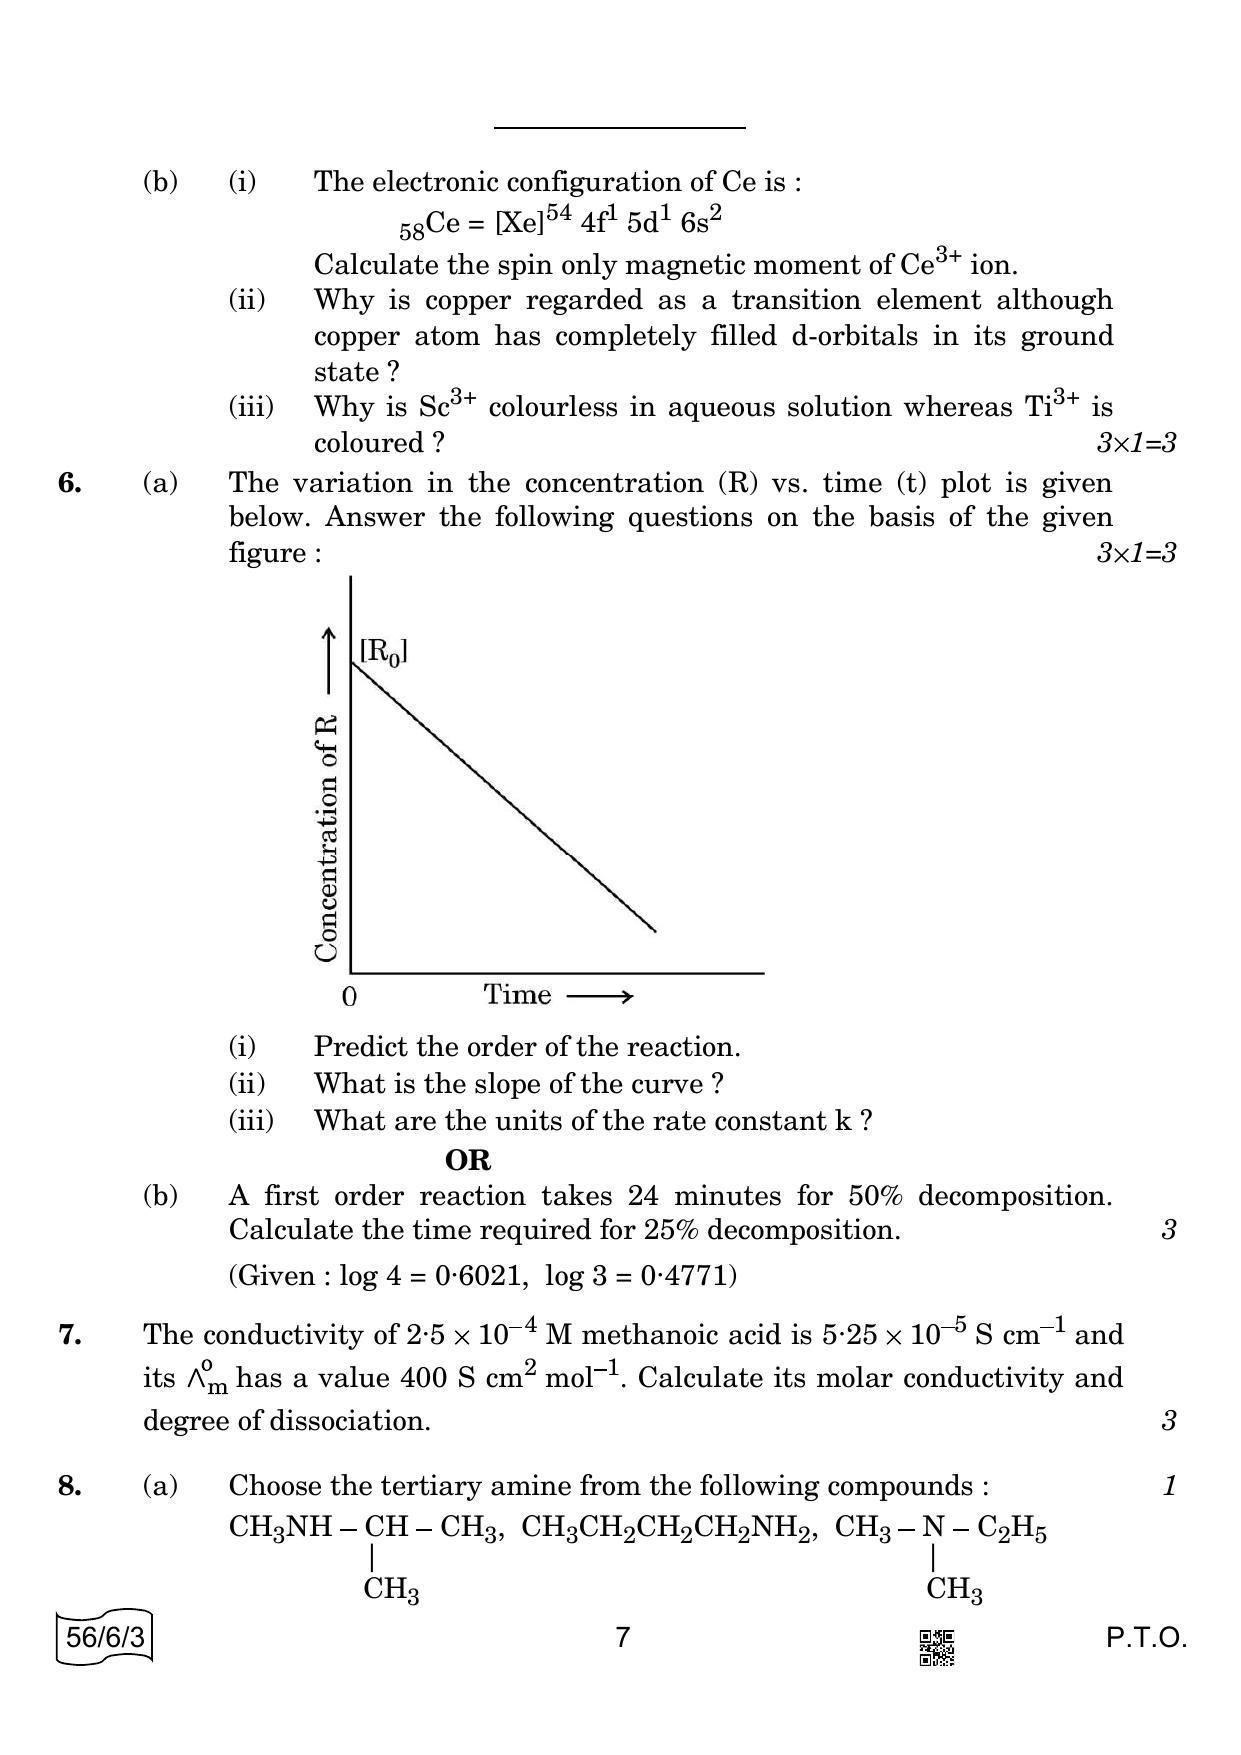 CBSE Class 12 56-6-3 CHEMISTRY 2022 Compartment Question Paper - Page 7